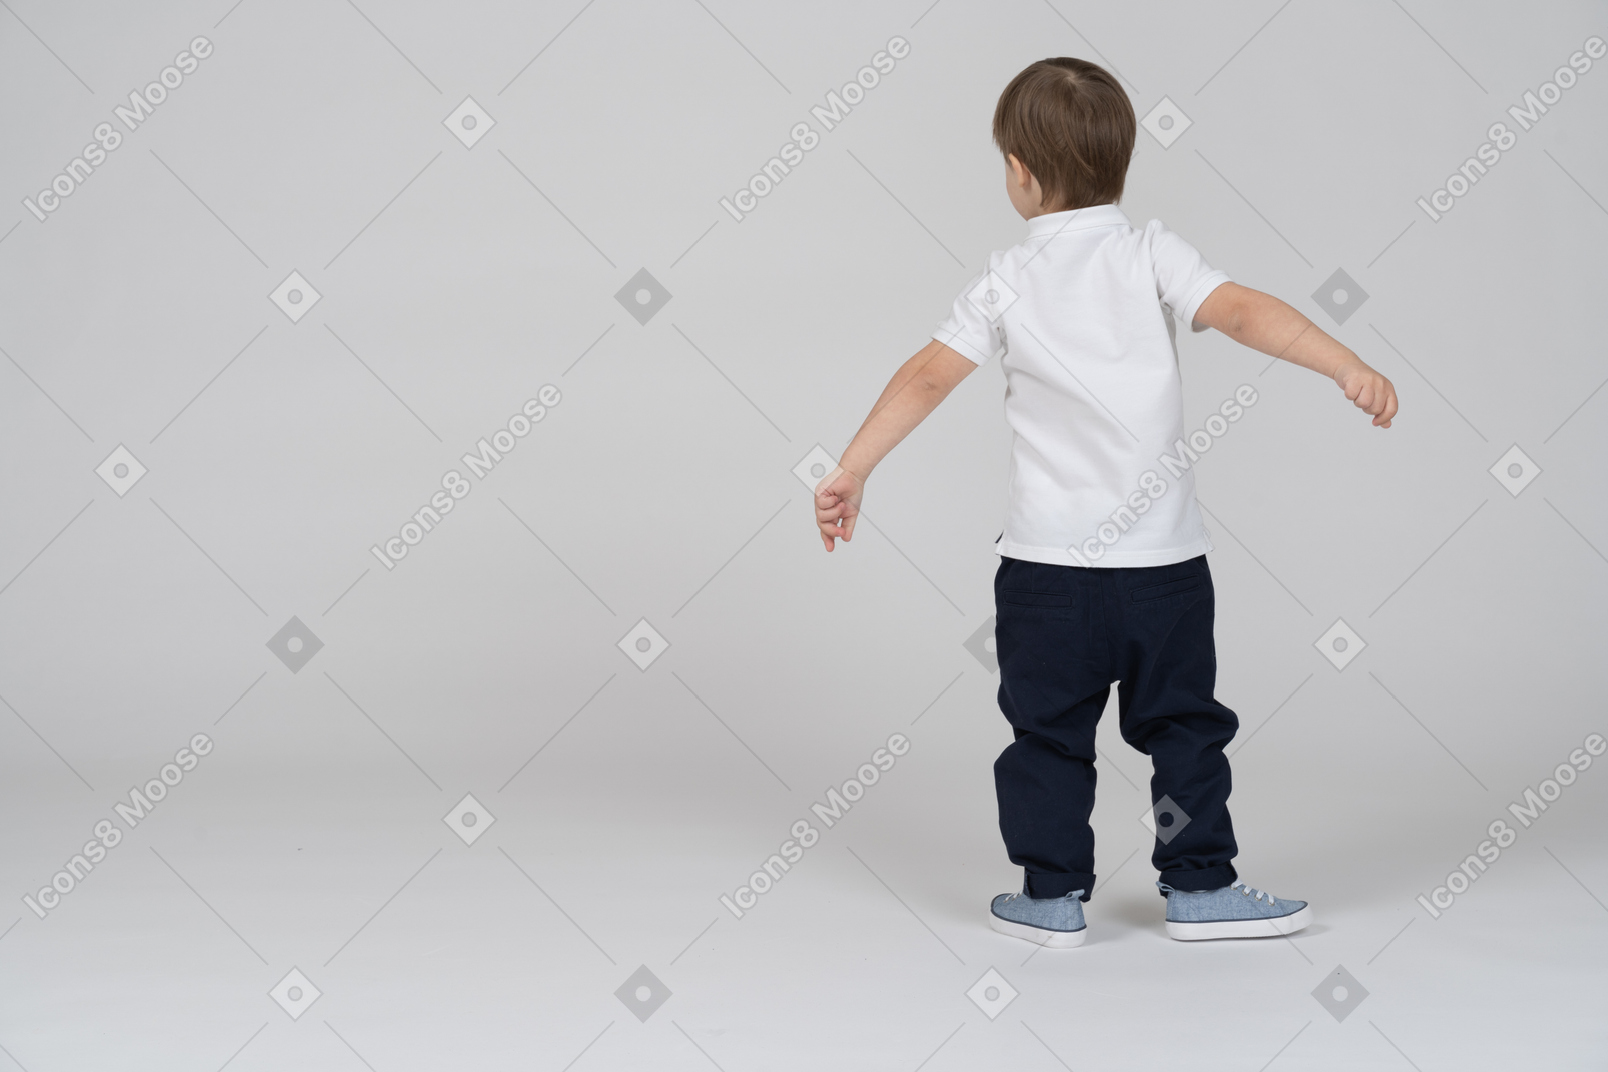 Back view of little boy swinging his arms